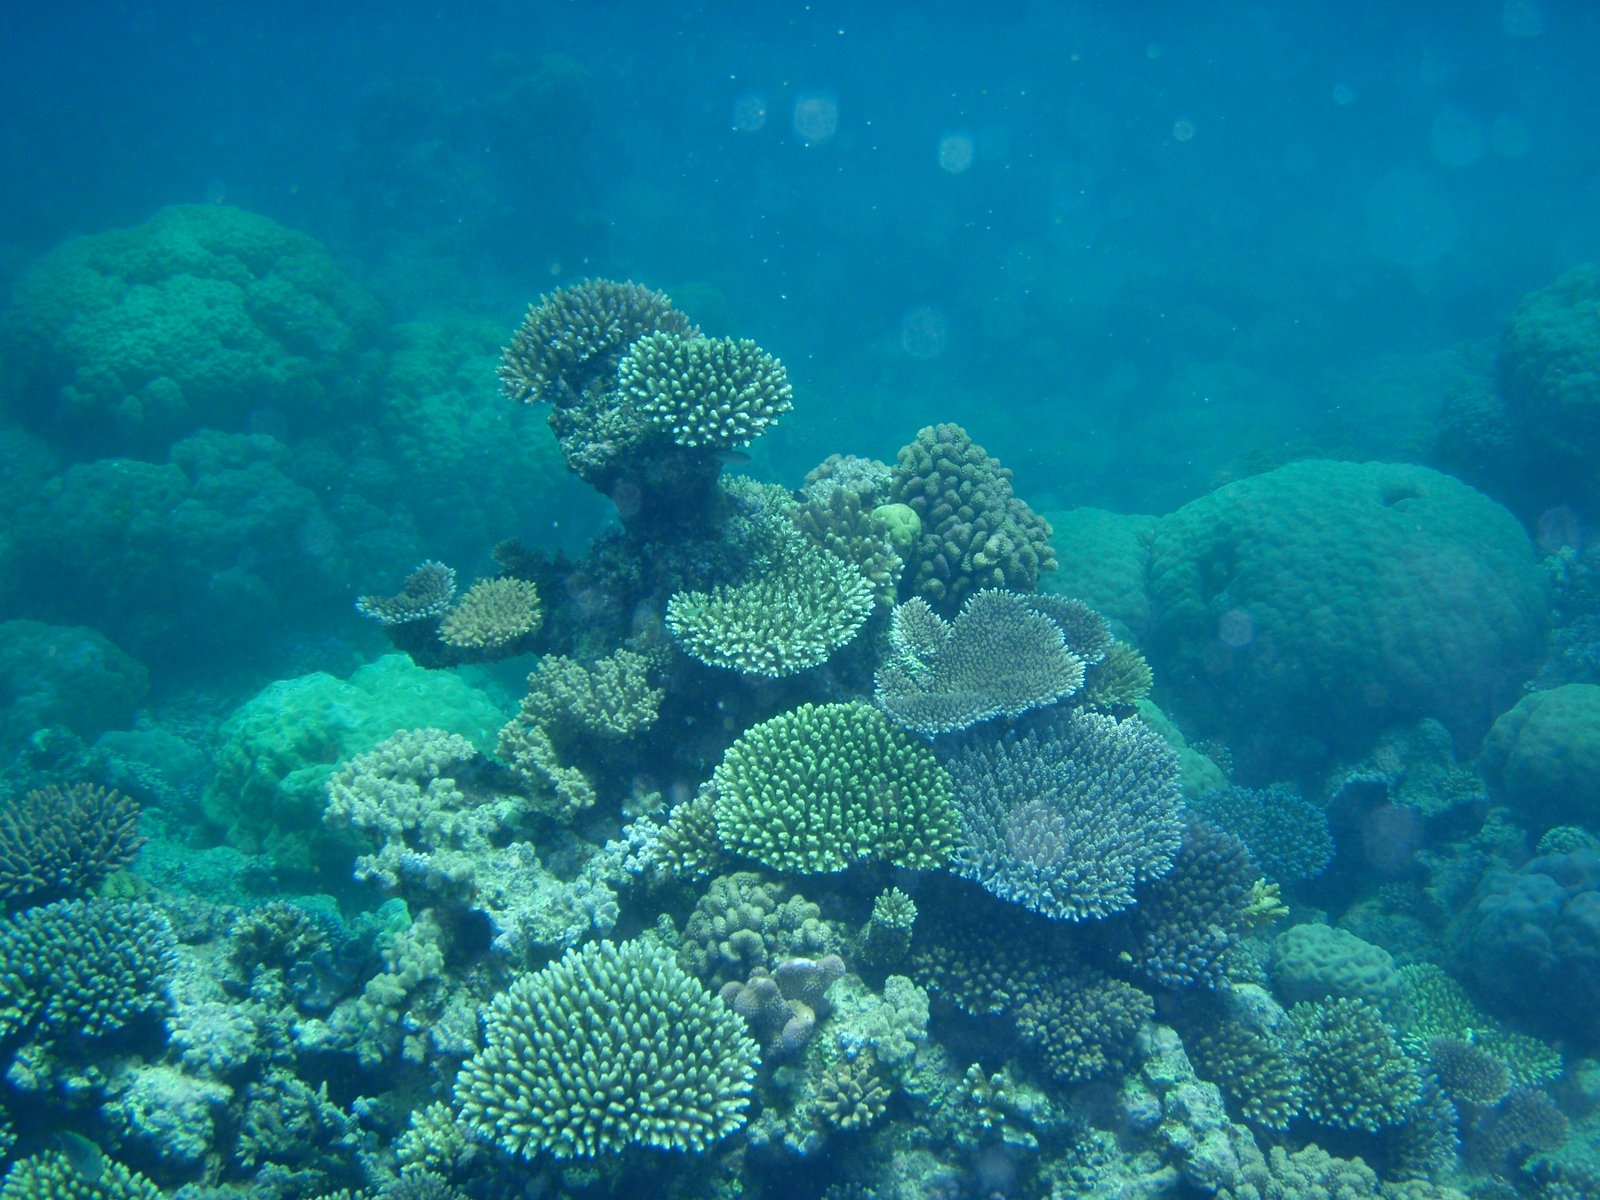 an underwater scene with several large corals and reefs